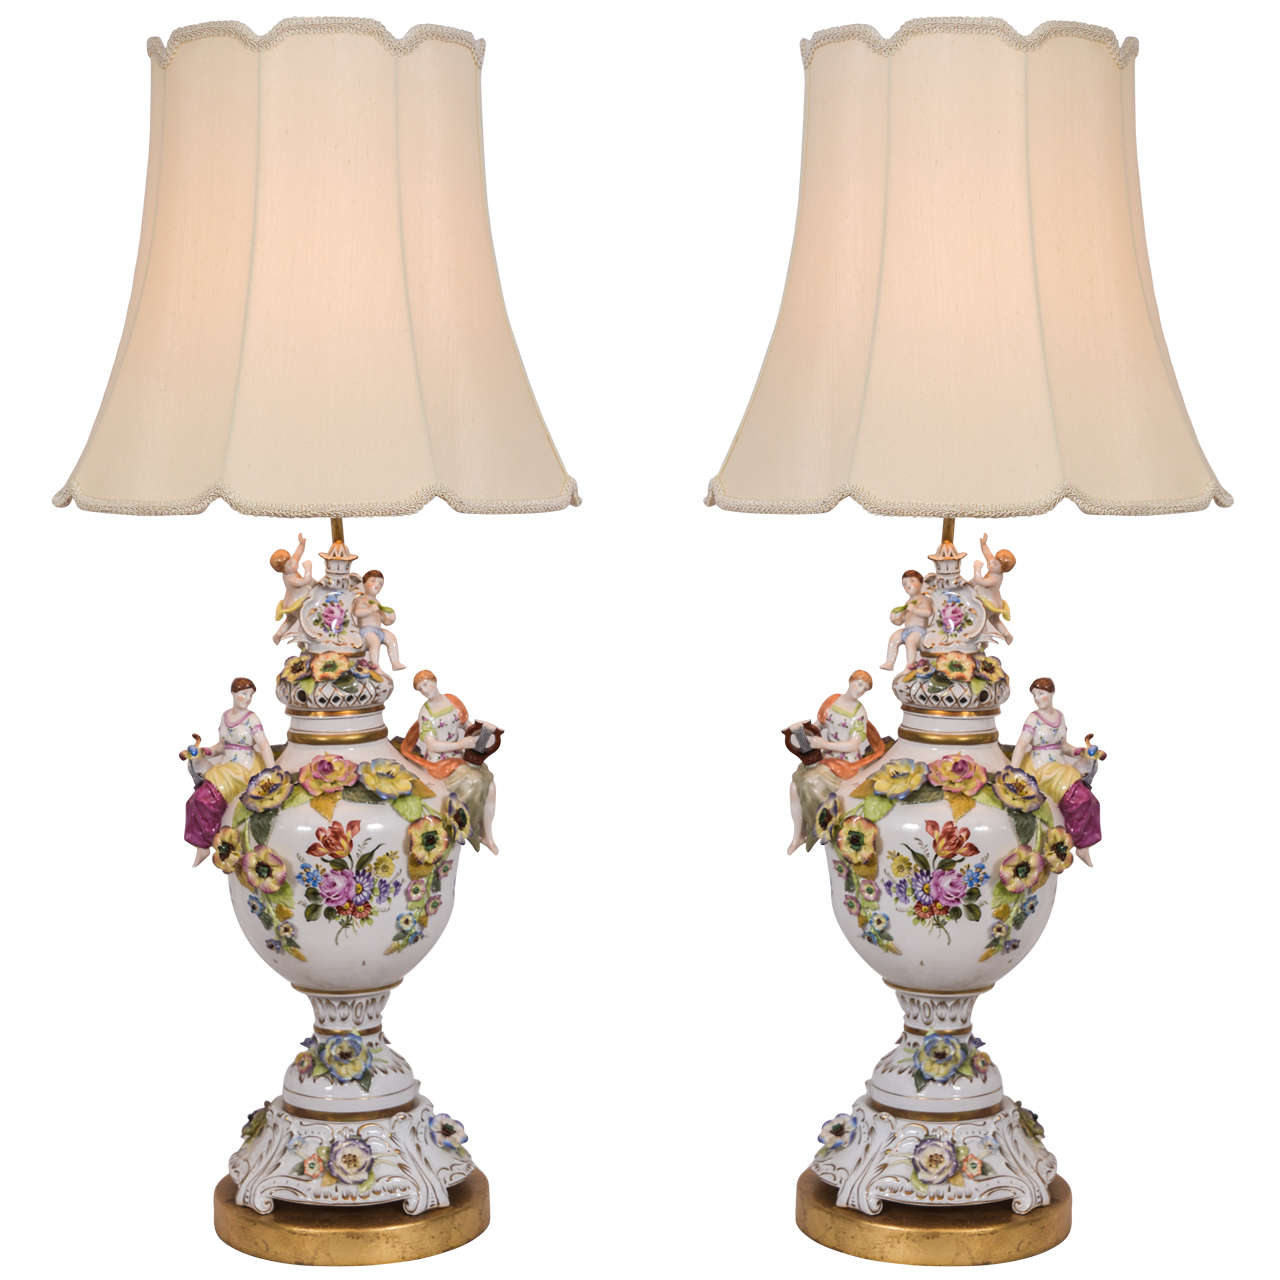 German Porcelain Urns as Lamps For Sale